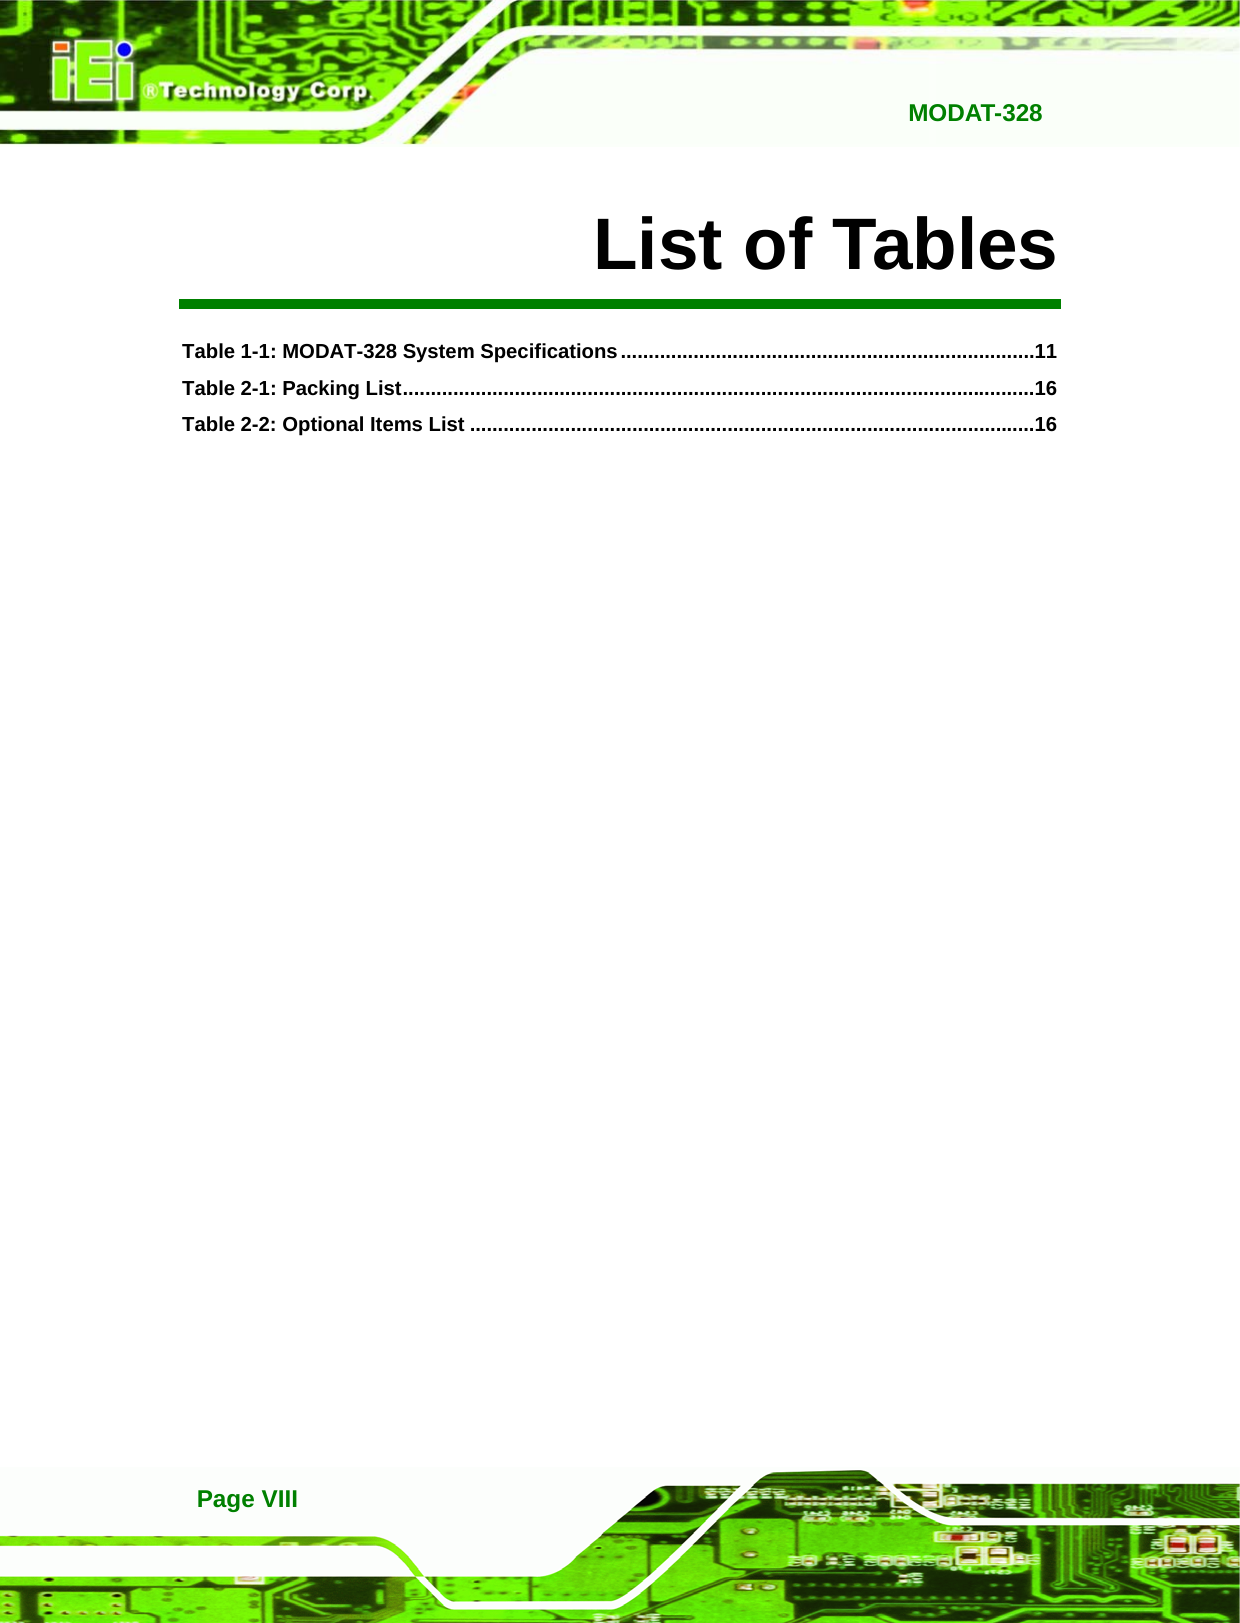   MODAT-328Page VIII List of Tables Table 1-1: MODAT-328 System Specifications .......................................................................... 11 Table 2-1: Packing List ................................................................................................................. 16 Table 2-2: Optional Items List ..................................................................................................... 16  